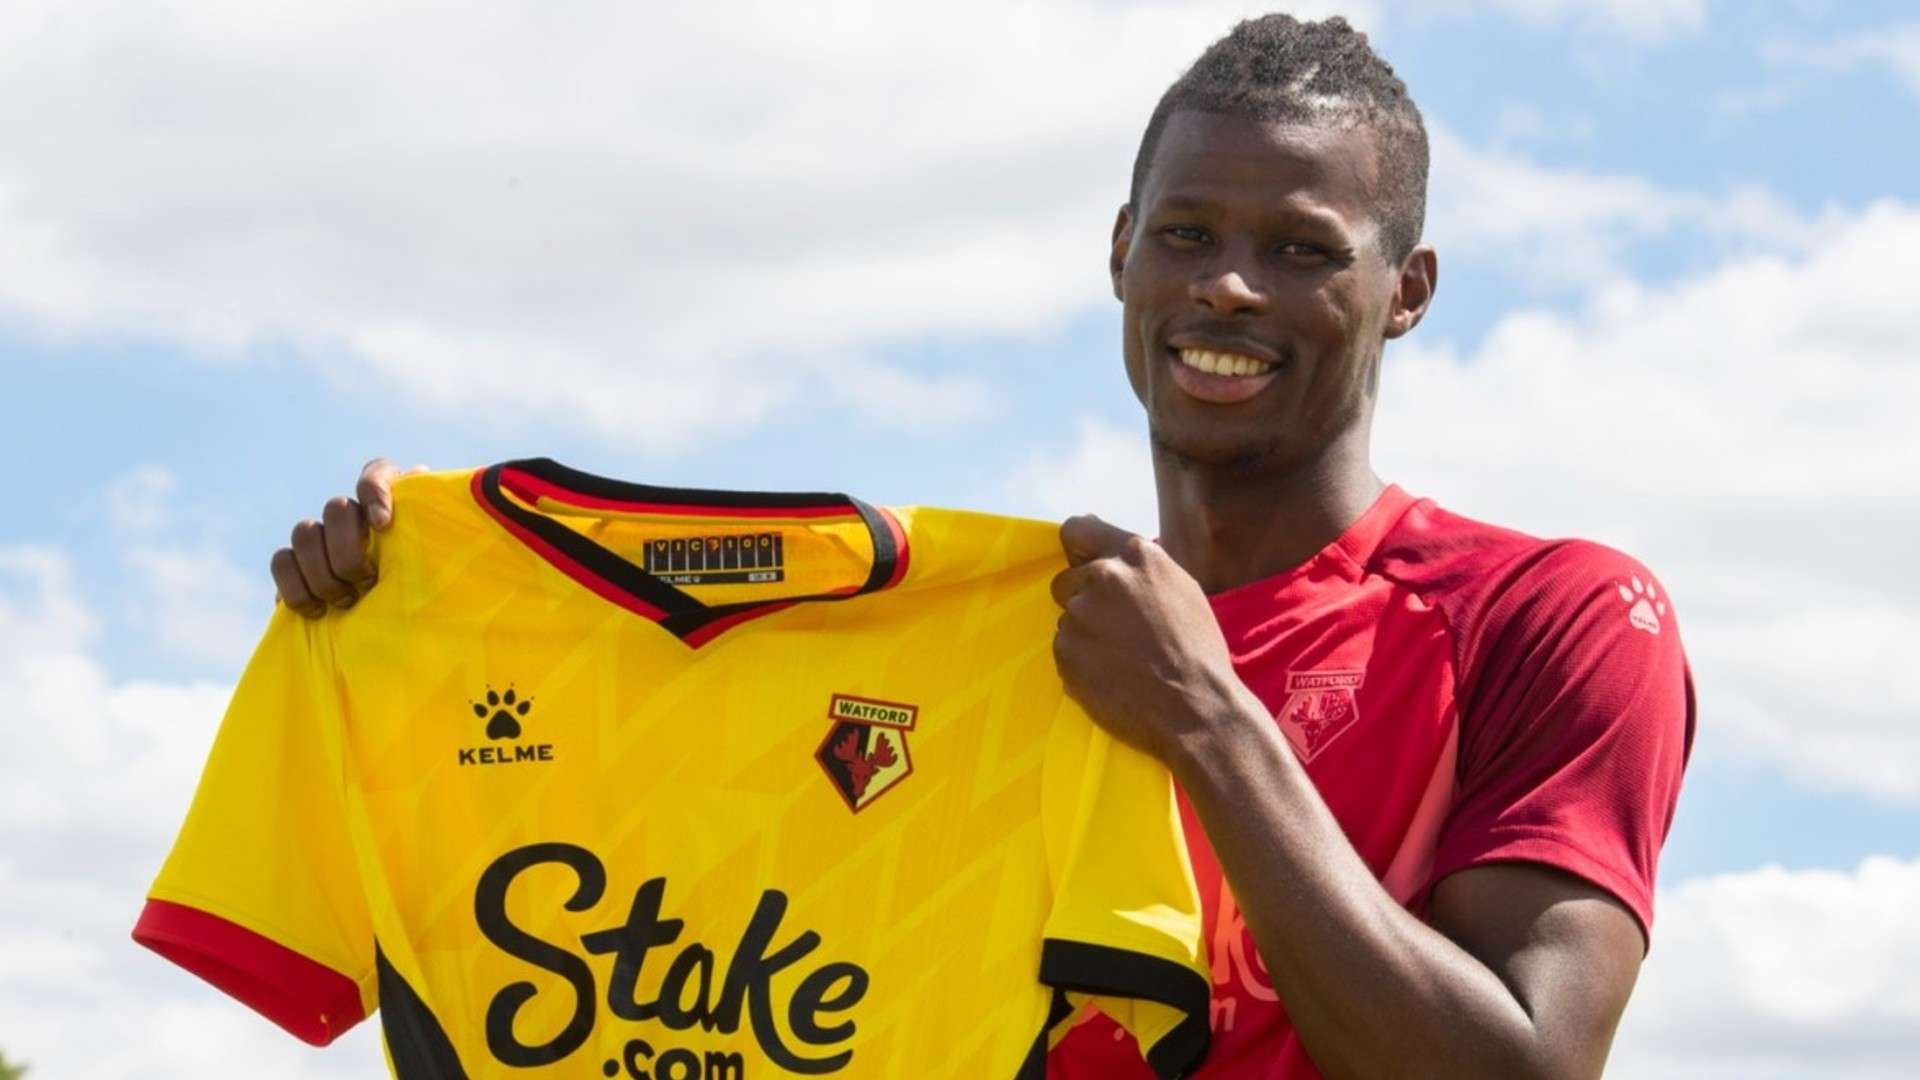 Watford FC is delighted to announce the signing of Ivorian striker Vakoun Bayo.